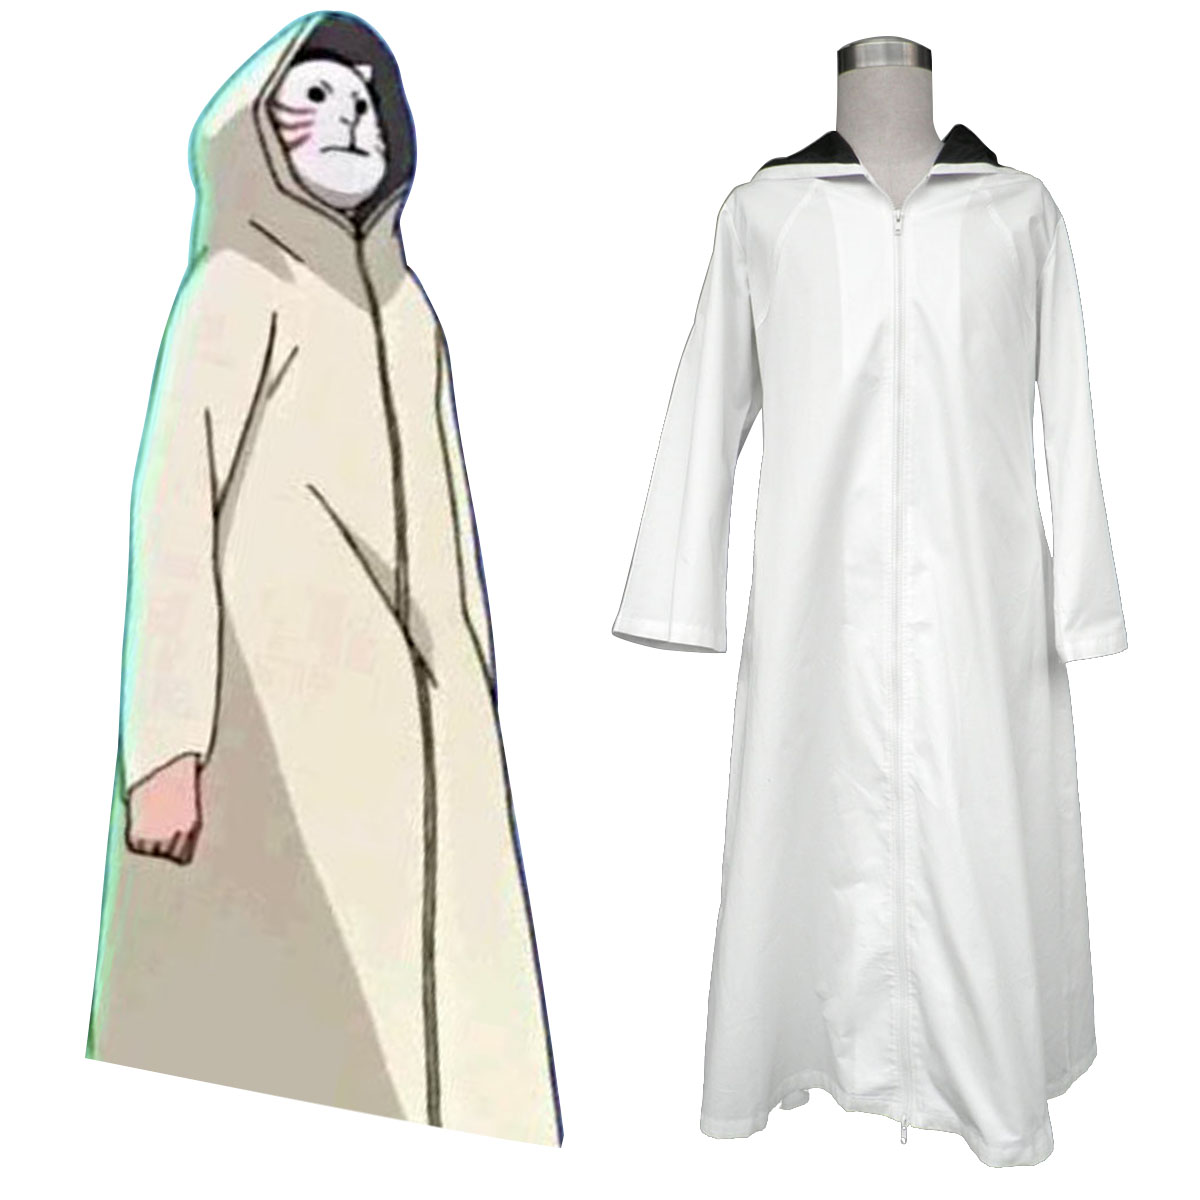 Naruto ANBU Cloak 1 Anime Cosplay Costumes Outfit